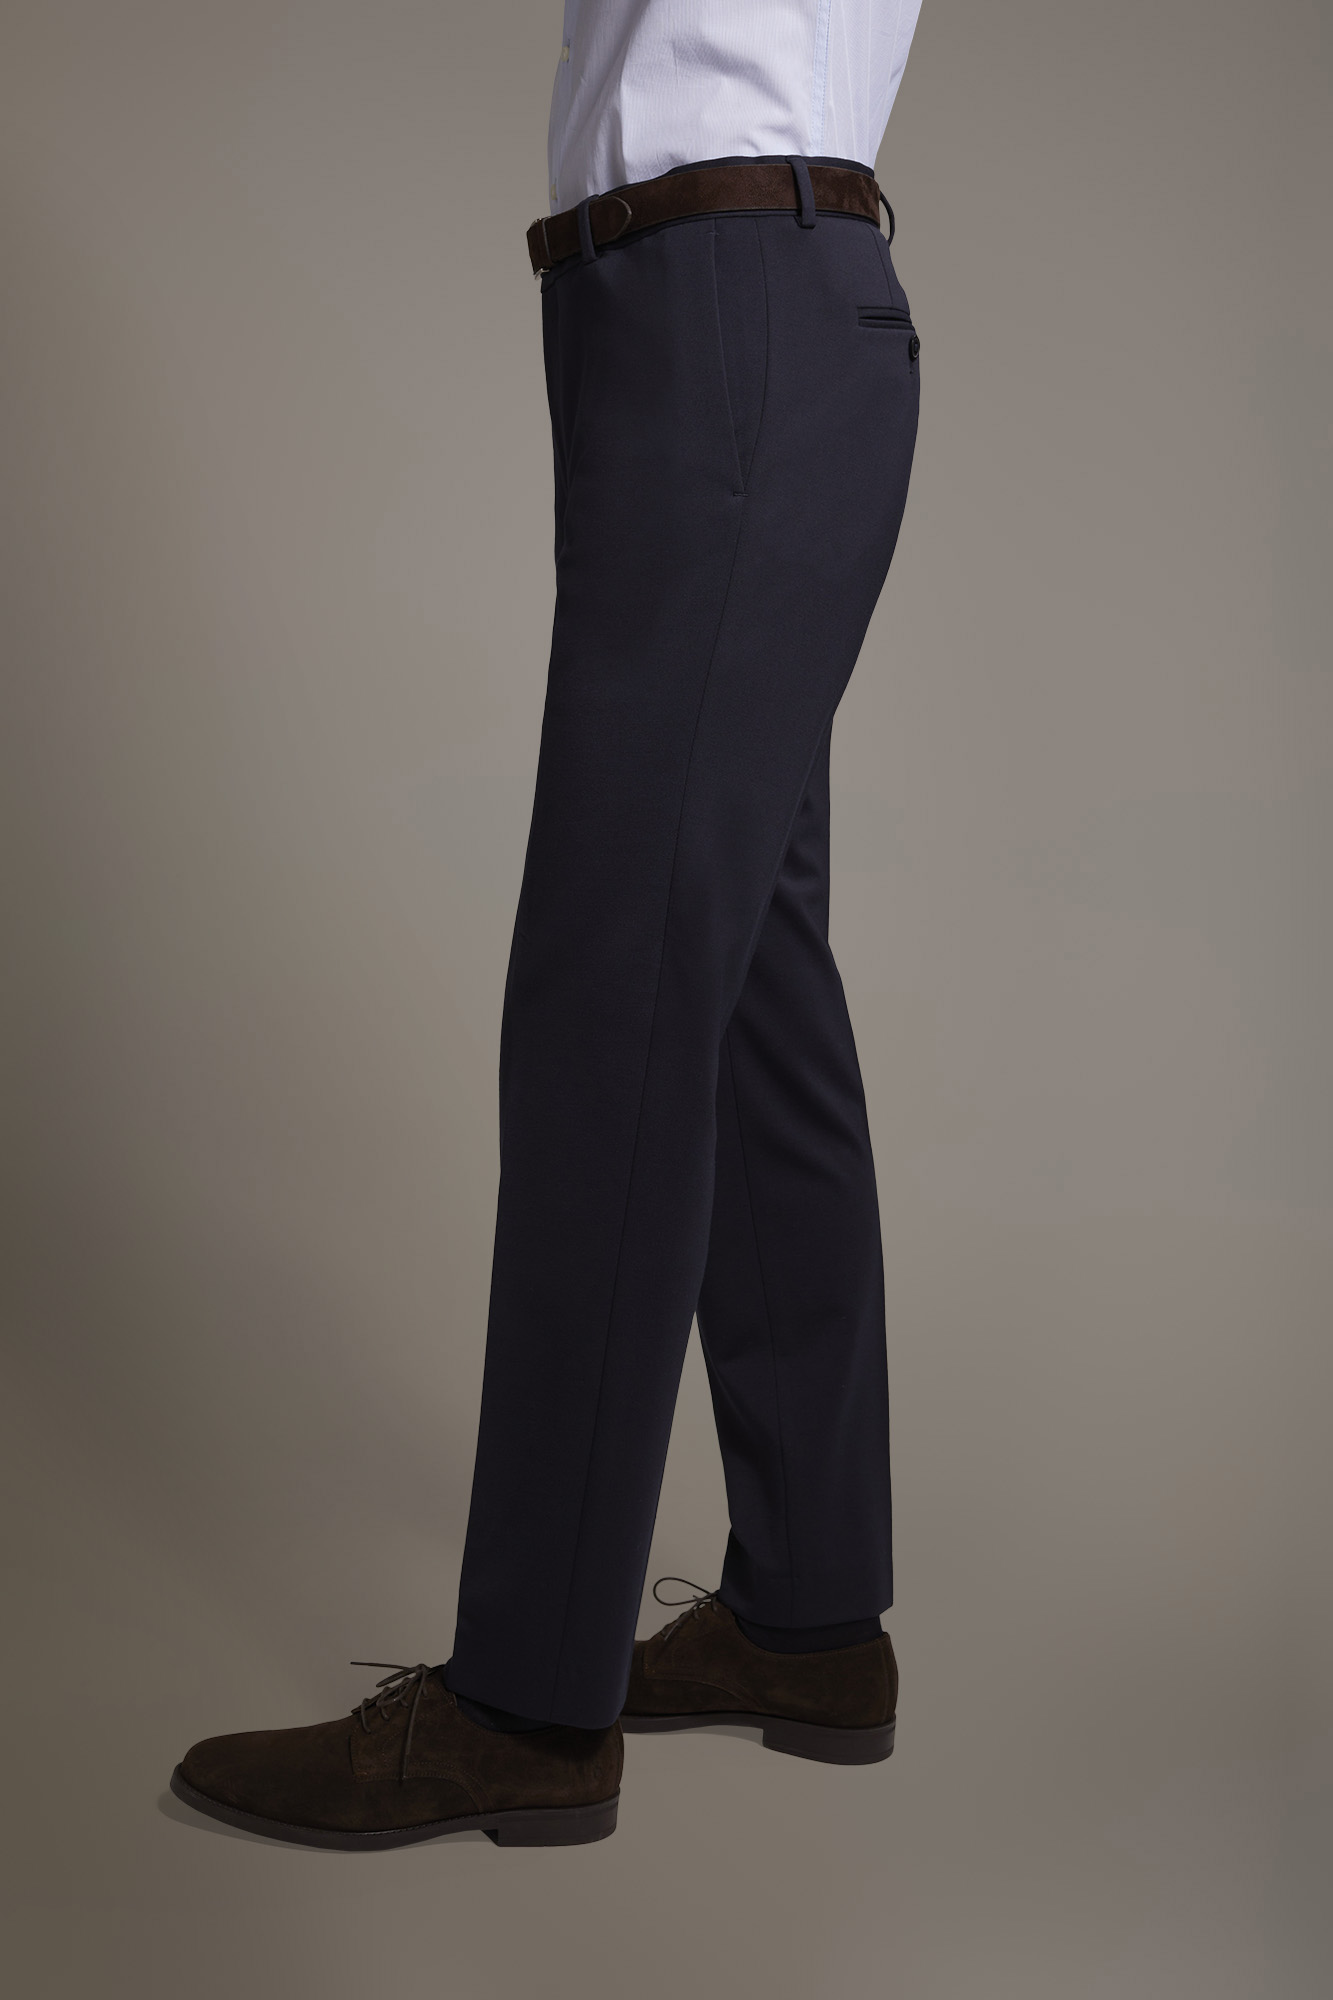 Pantalone uomo in jersey regular fit senza pinces piega classica blue navy image number null